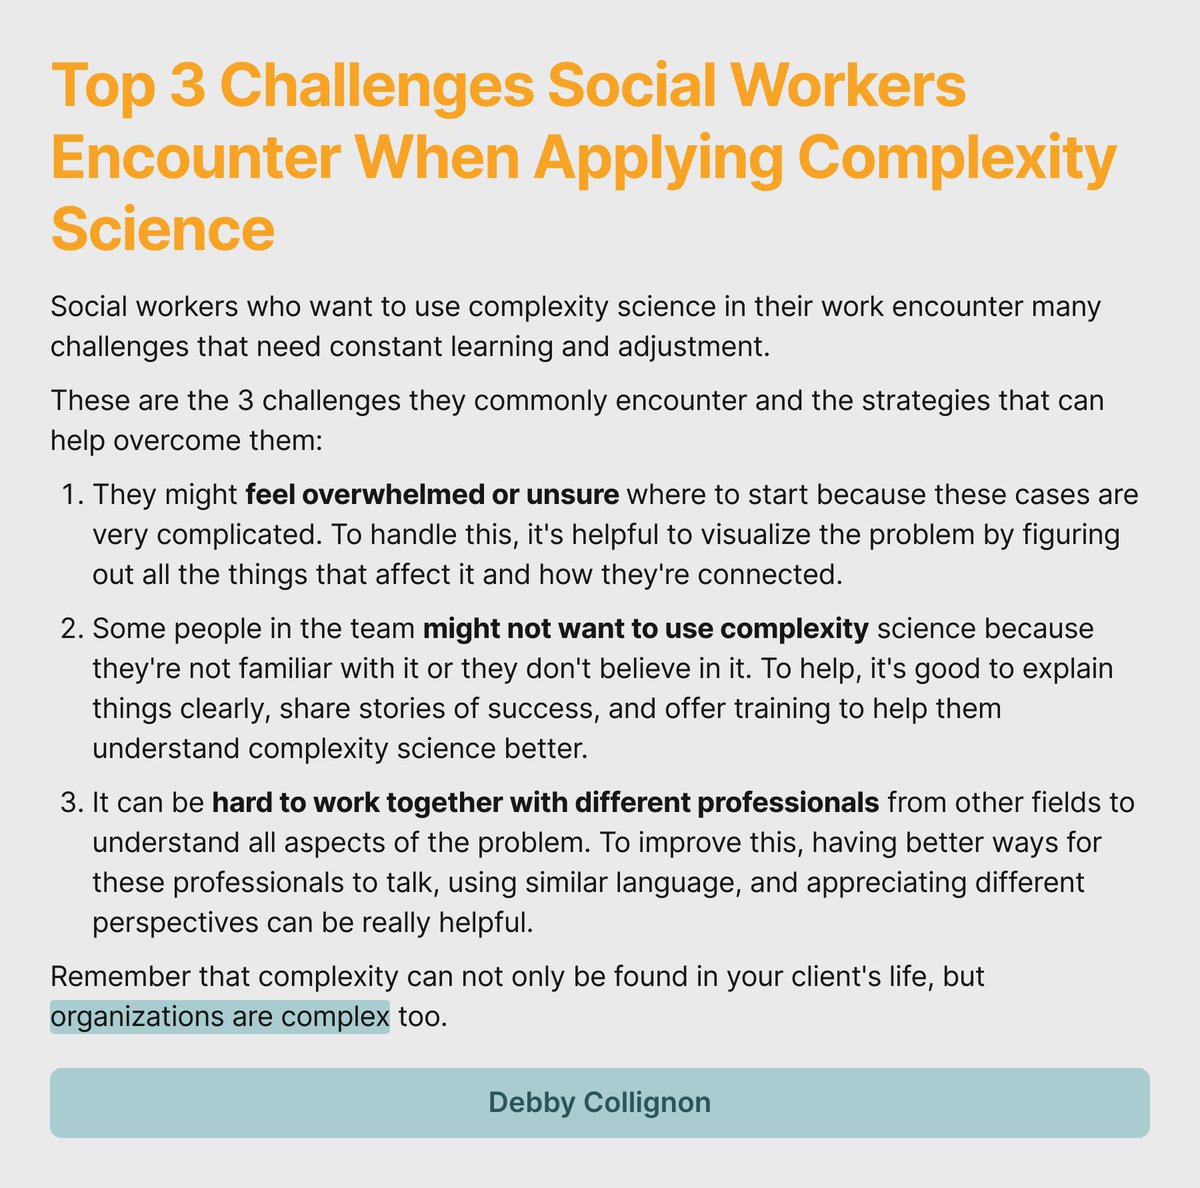 Top 3 Challenges Social Workers Encounter When Applying Complexity Science

#SocialWork
#SocialWorkComplexity
#AdaptingToComplexity
#SocialWorkChallenges
#ComplexityScience
#InterdisciplinaryCollaboration
#TeamCollaboration
#ComplexProblemSolving